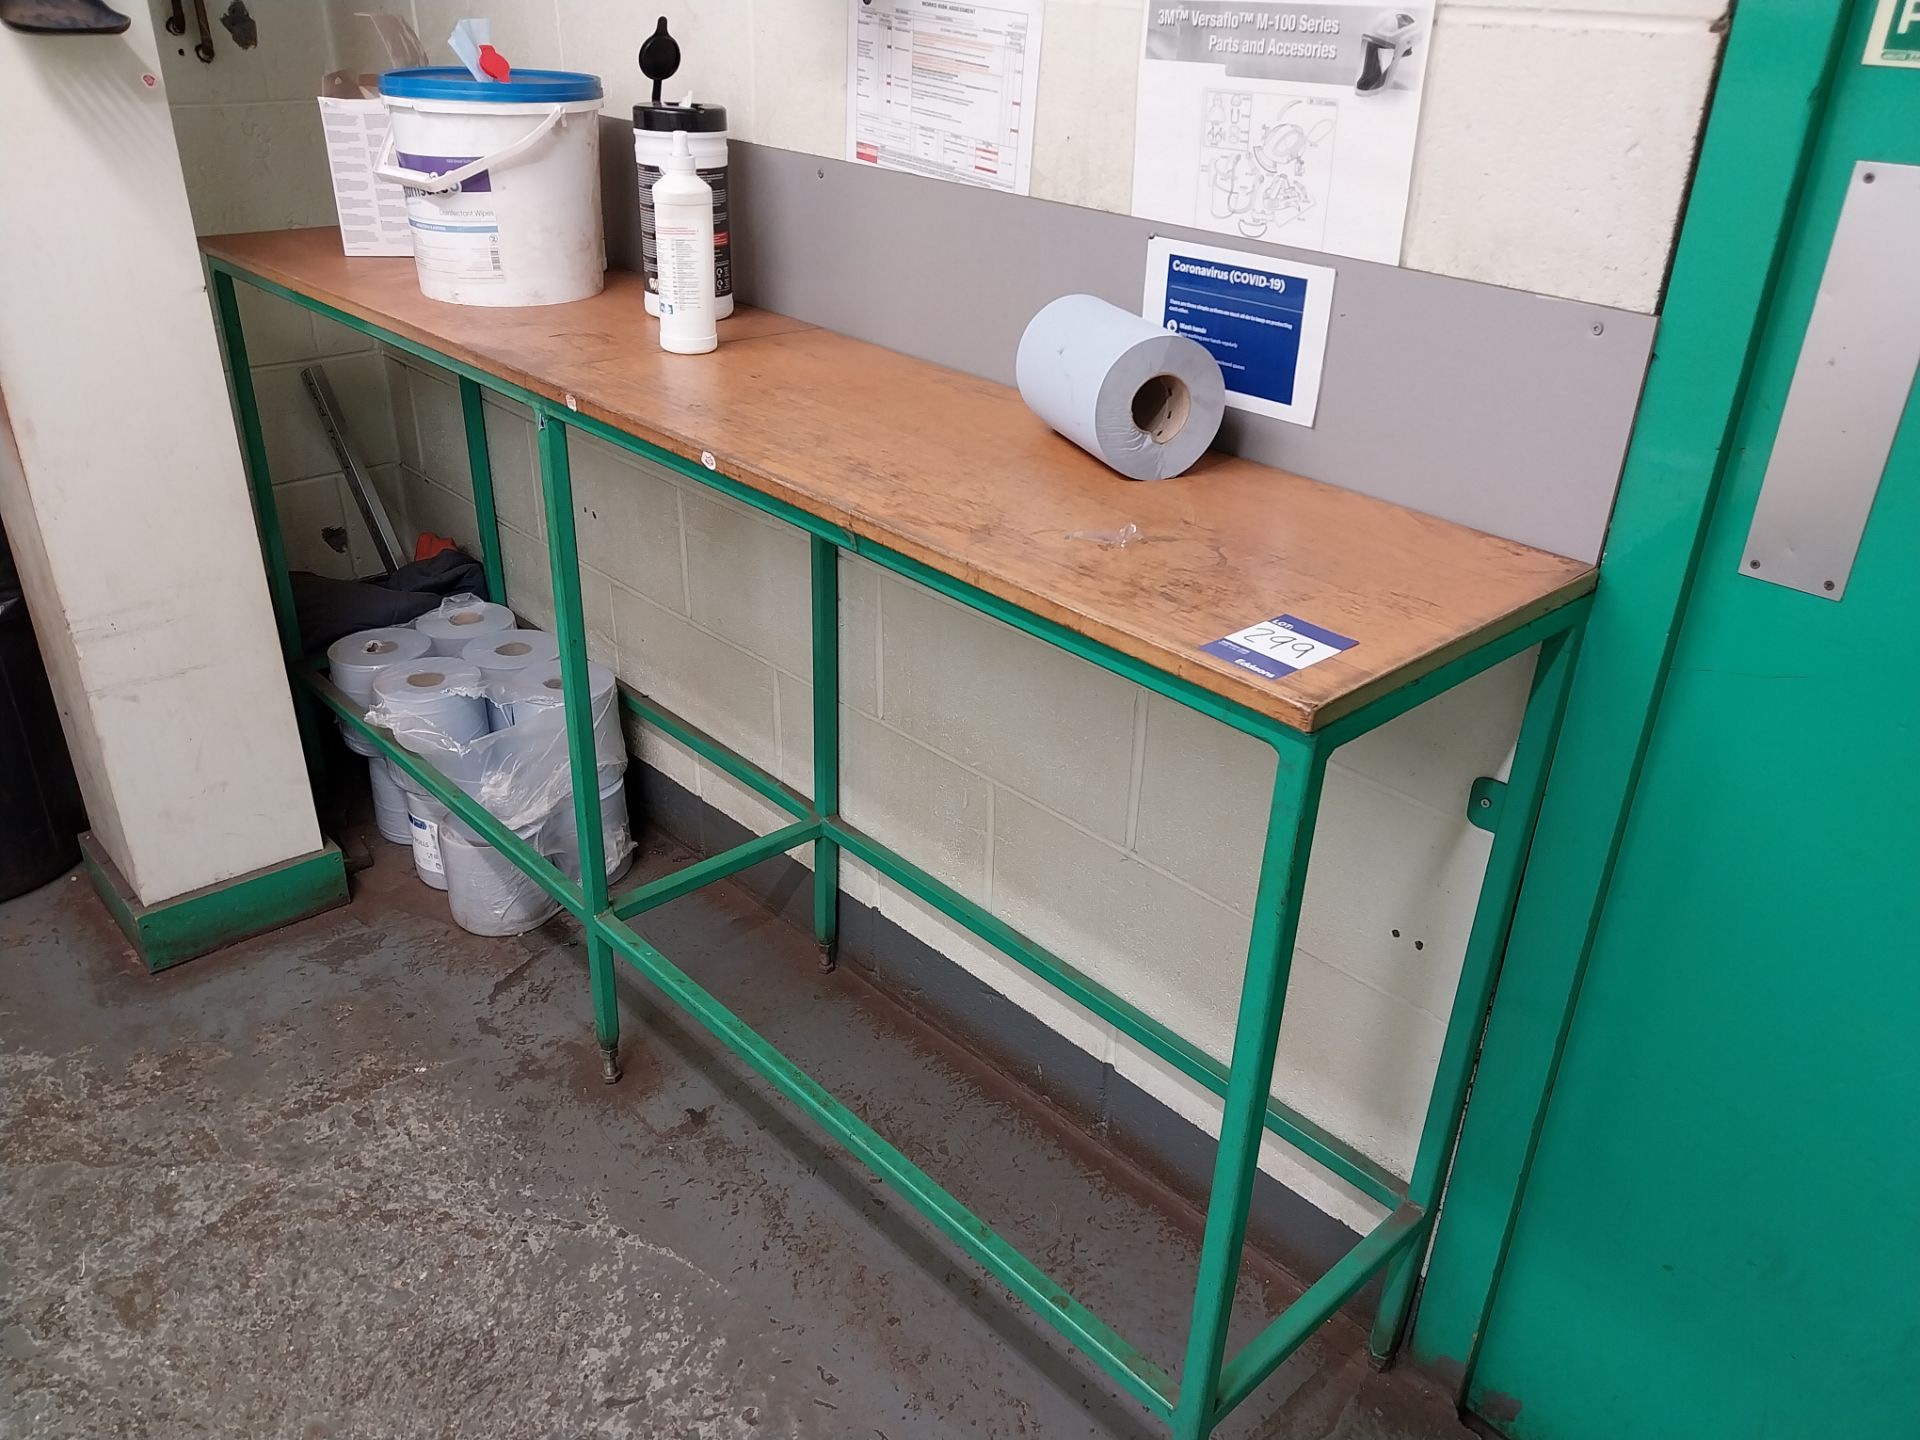 Steel workbench, blue roll and disinfectant wipes